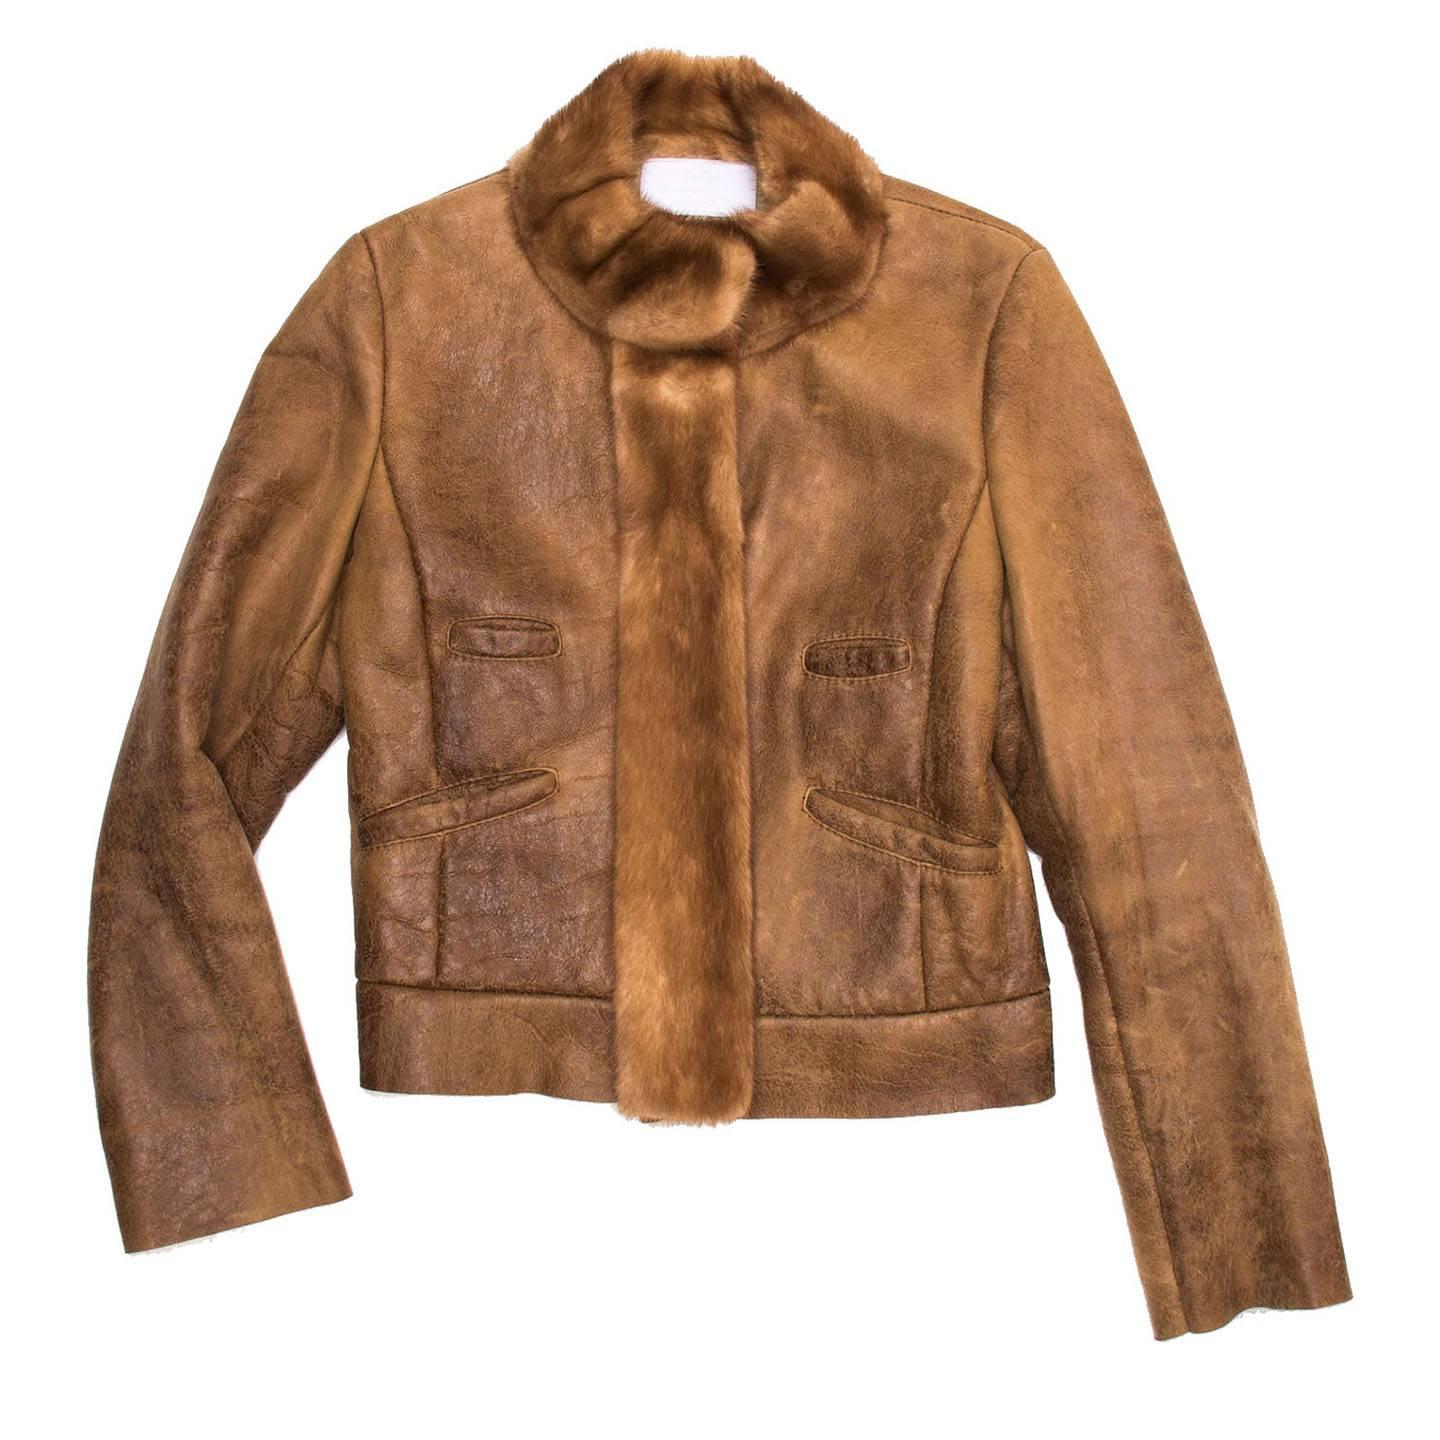 Fitted brown distressed leather shearling lined jacket with mink detailing on band collar and front jacket opening.

Size  44 Italian sizing

Condition  Excellent: worn a few times